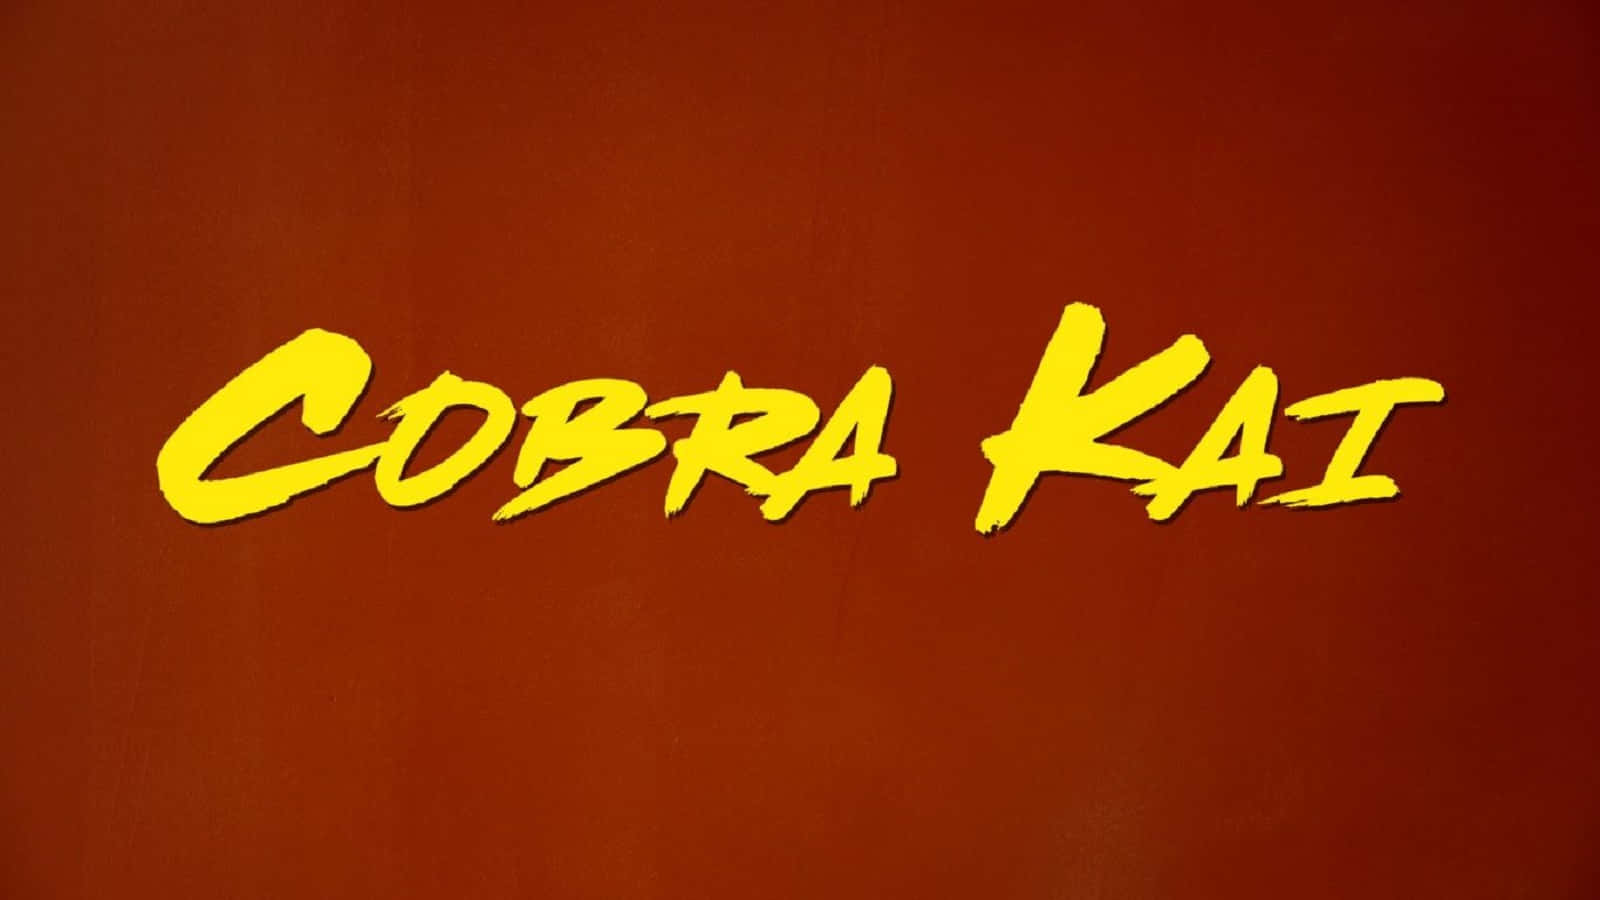 " Follow along with the students of Cobra Kai dojo as they battle their way to the top in the rigorous Karate Championships"